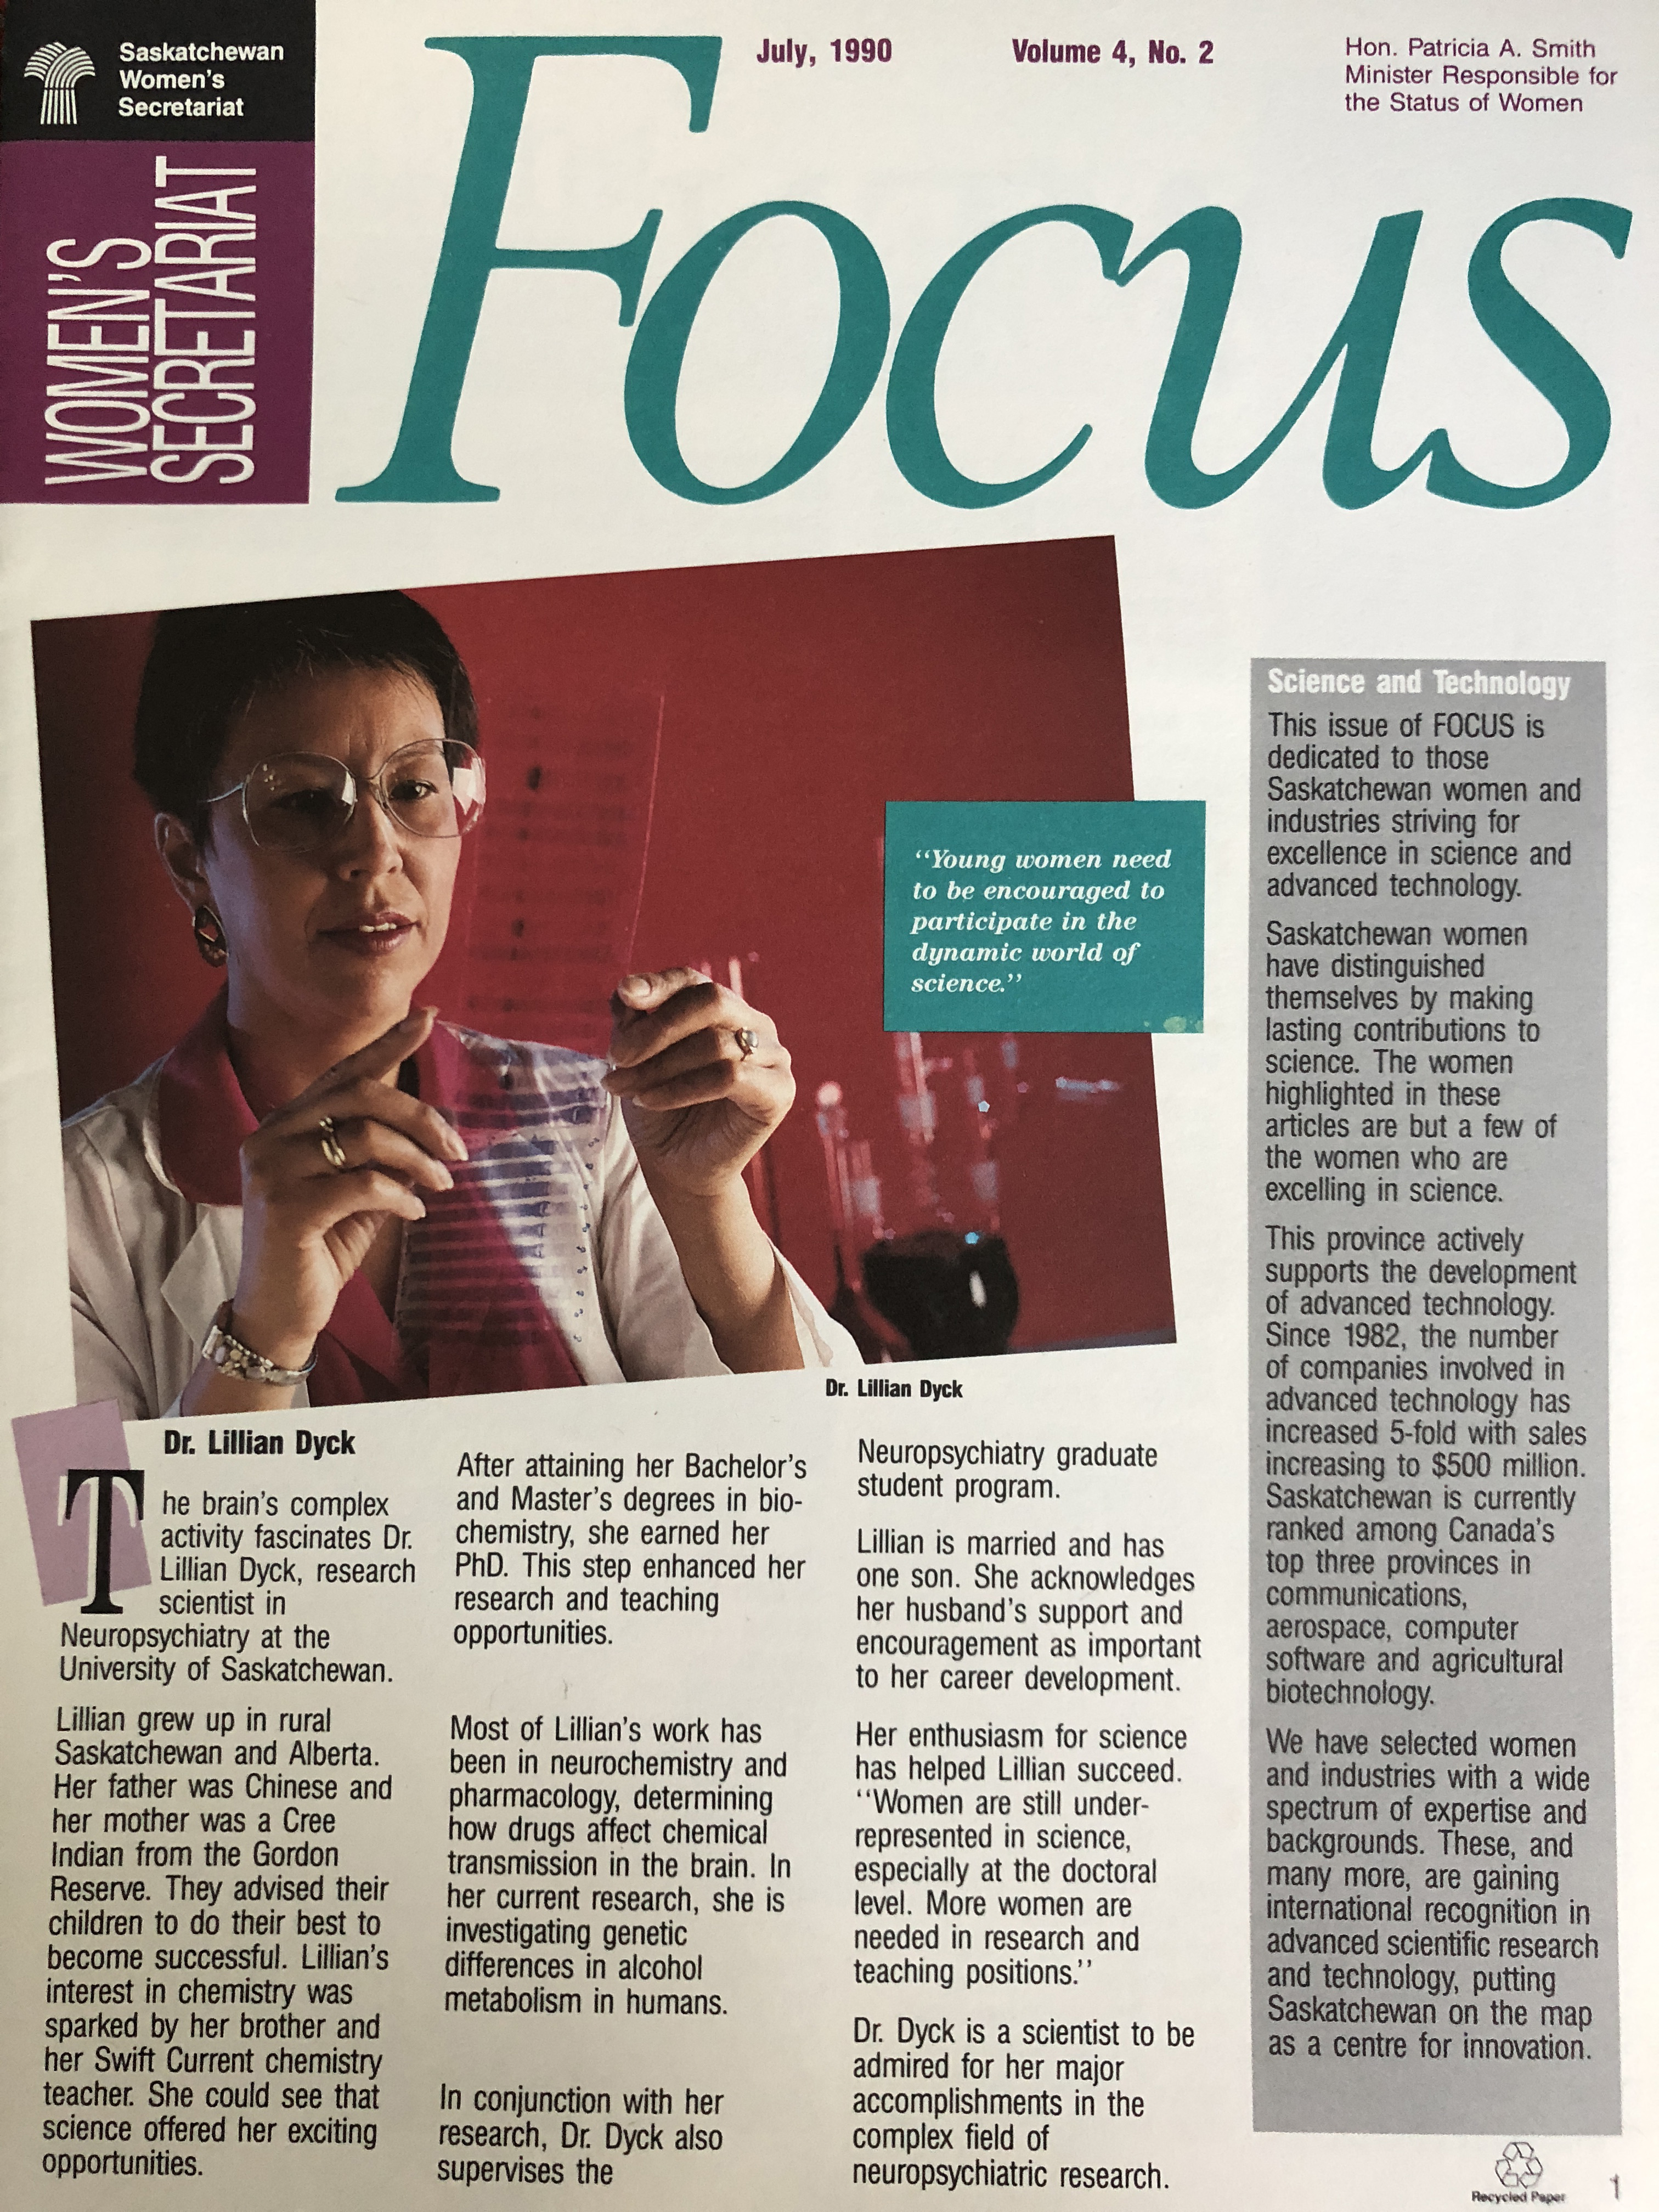 In this article from Focus magazine, Senator Lillian Eva Dyck examines a gel separation of alcohol-metabolizing enzymes from human hair root samples.